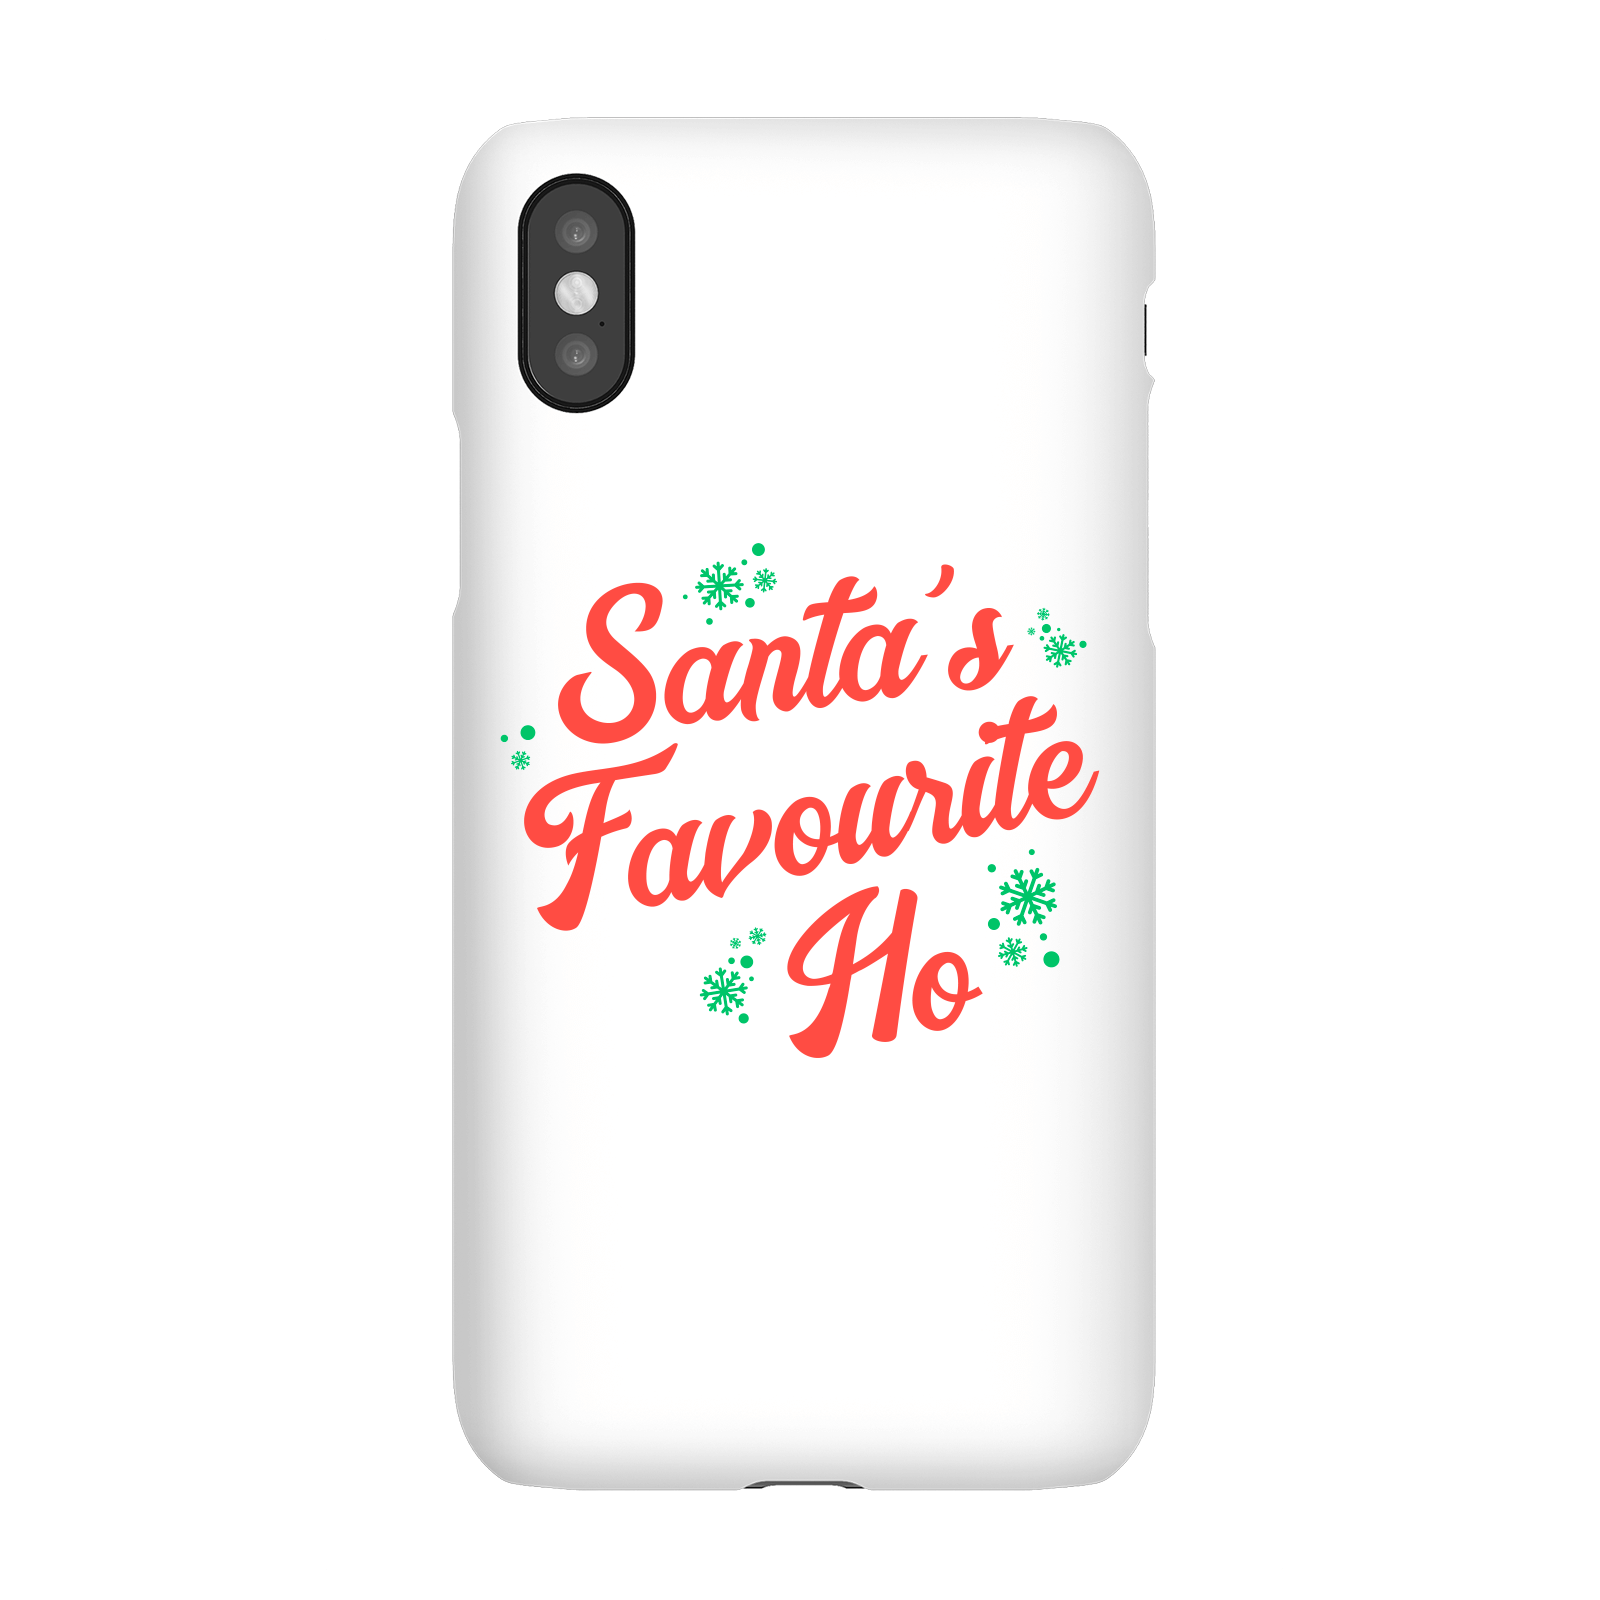 Santa's Favourite Ho Phone Case for iPhone and Android - iPhone 5/5s - Snap Case - Matte